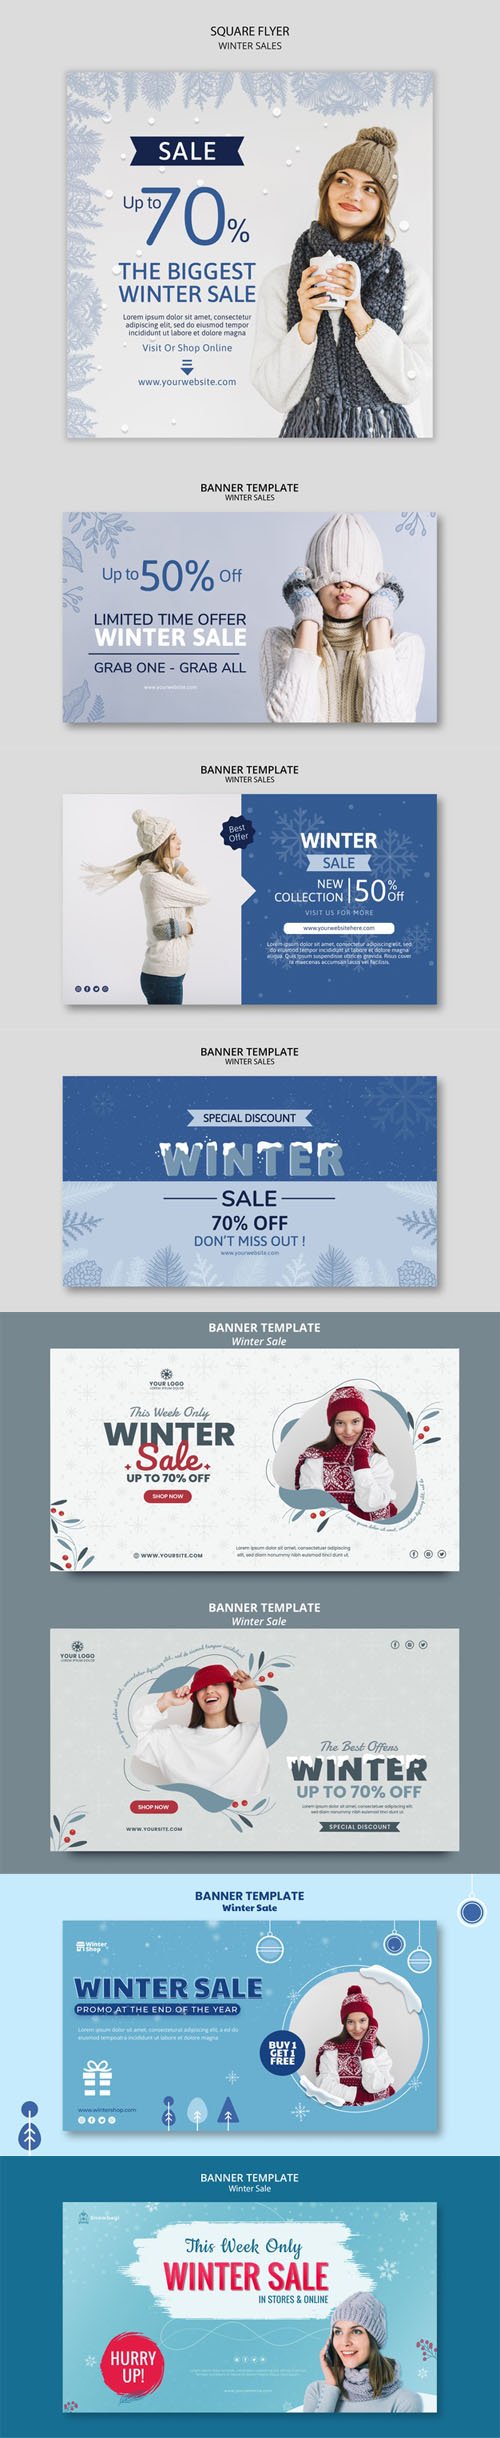 8 Winter Sales Banners PSD Templates Collection